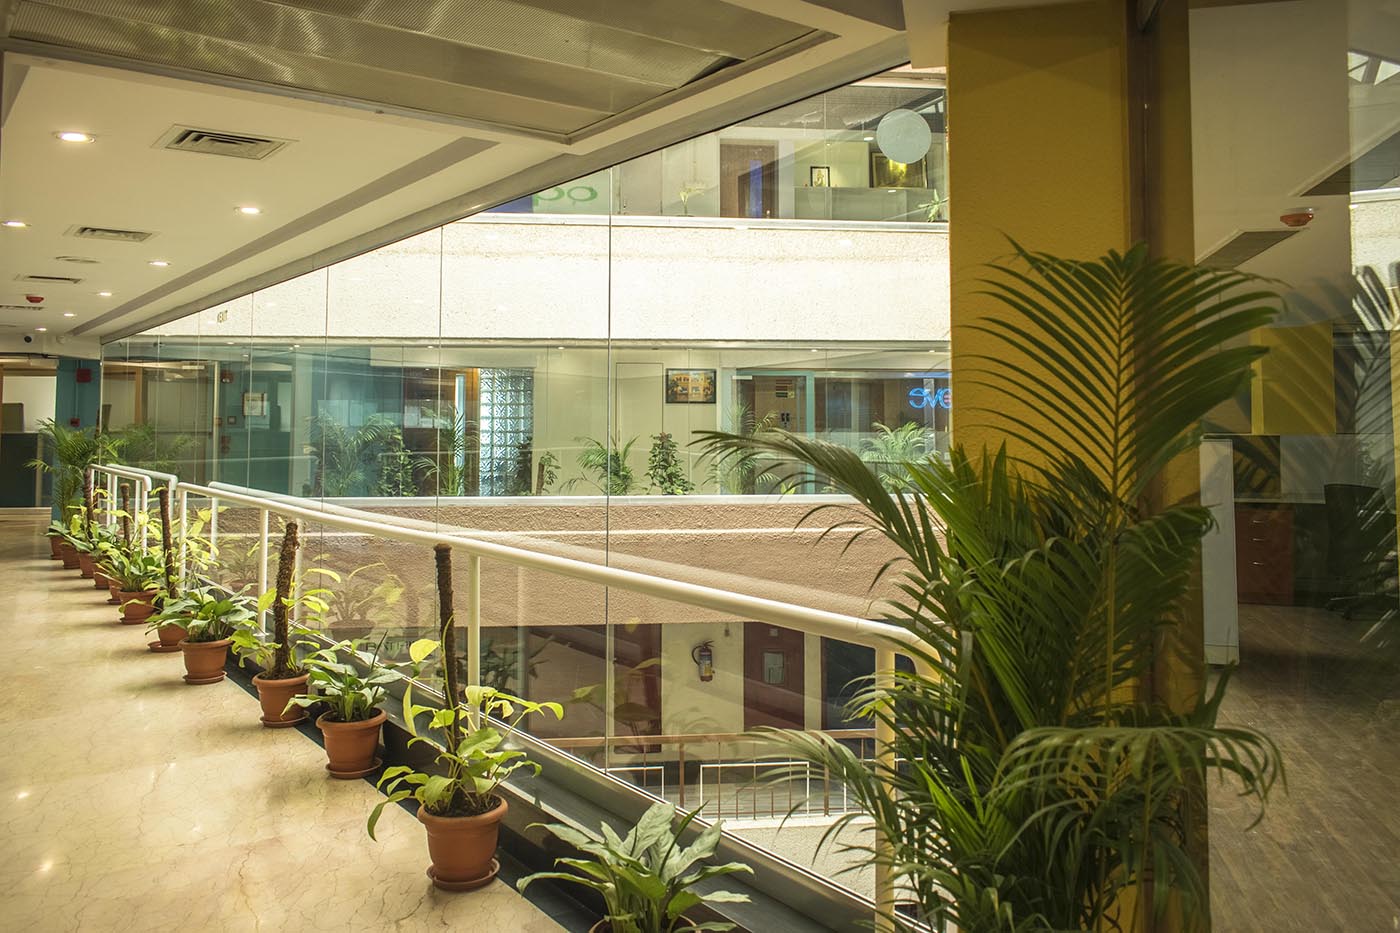 Cove Offices’ shared office spaces for rent in Bangalore